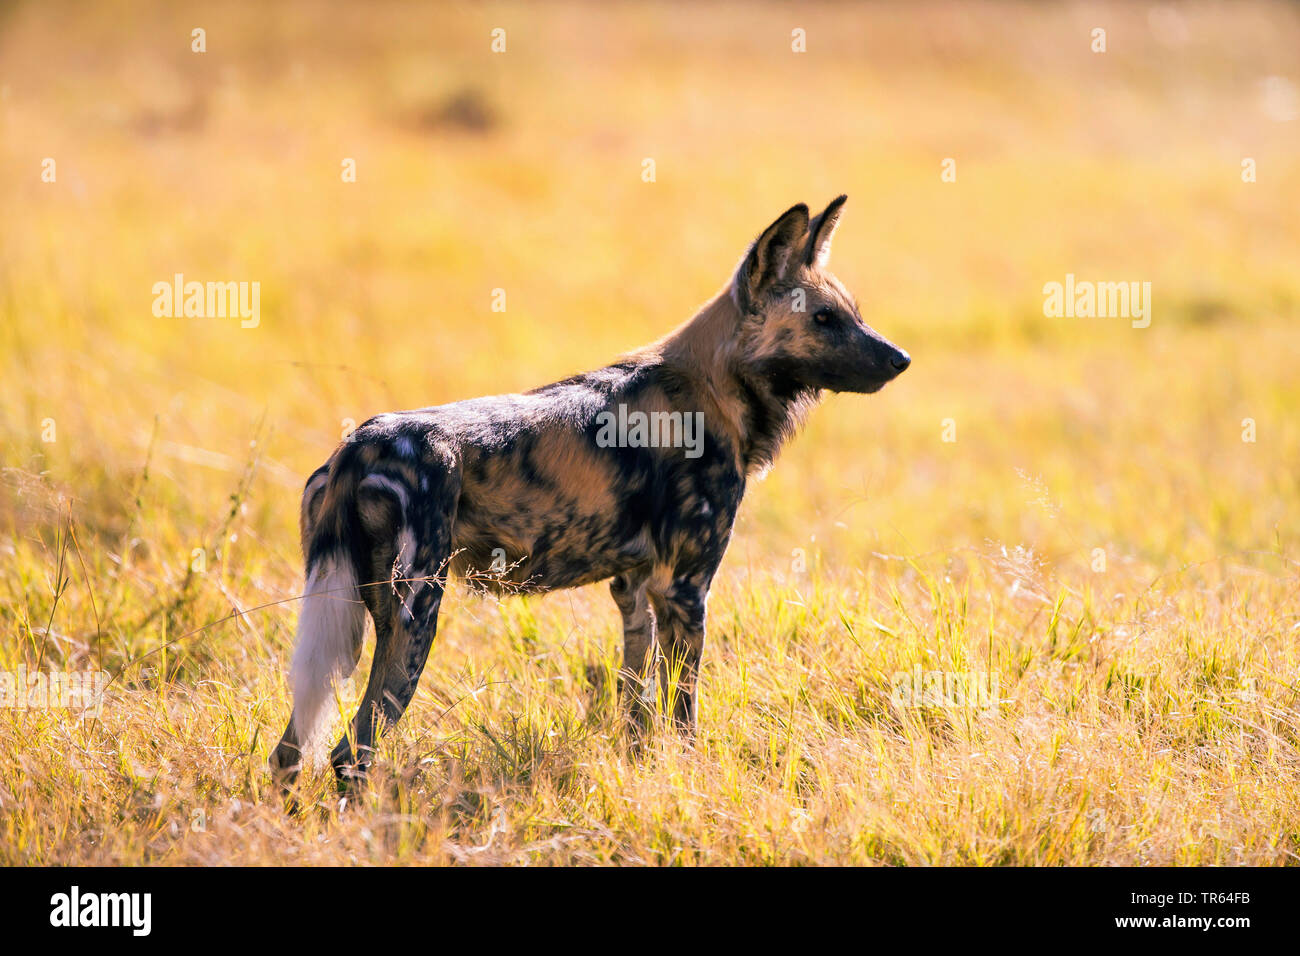 African wild dog, African hunting dog, Cape hunting dog, Painted dog, Painted wolf, Painted hunting dog, Spotted dog, Ornate wolf (Lycaon pictus), standing in the savannah, side view, Botswana Stock Photo